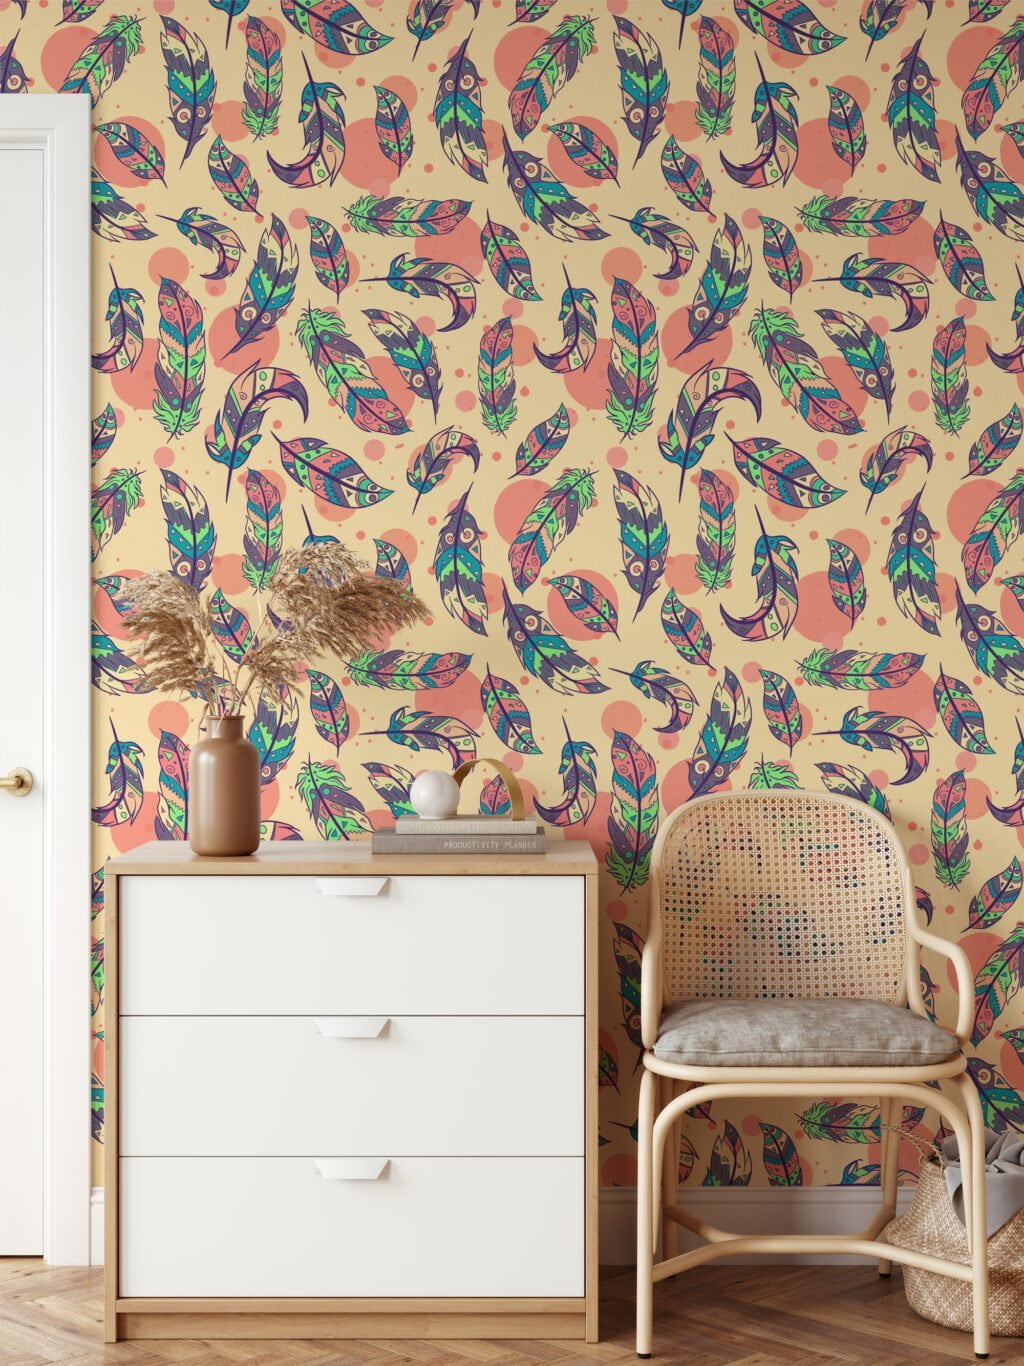 Colorful Cartoon Style Feathers Pattern Illustration Wallpaper, Bohemian Feather Design Peel & Stick Wall Mural